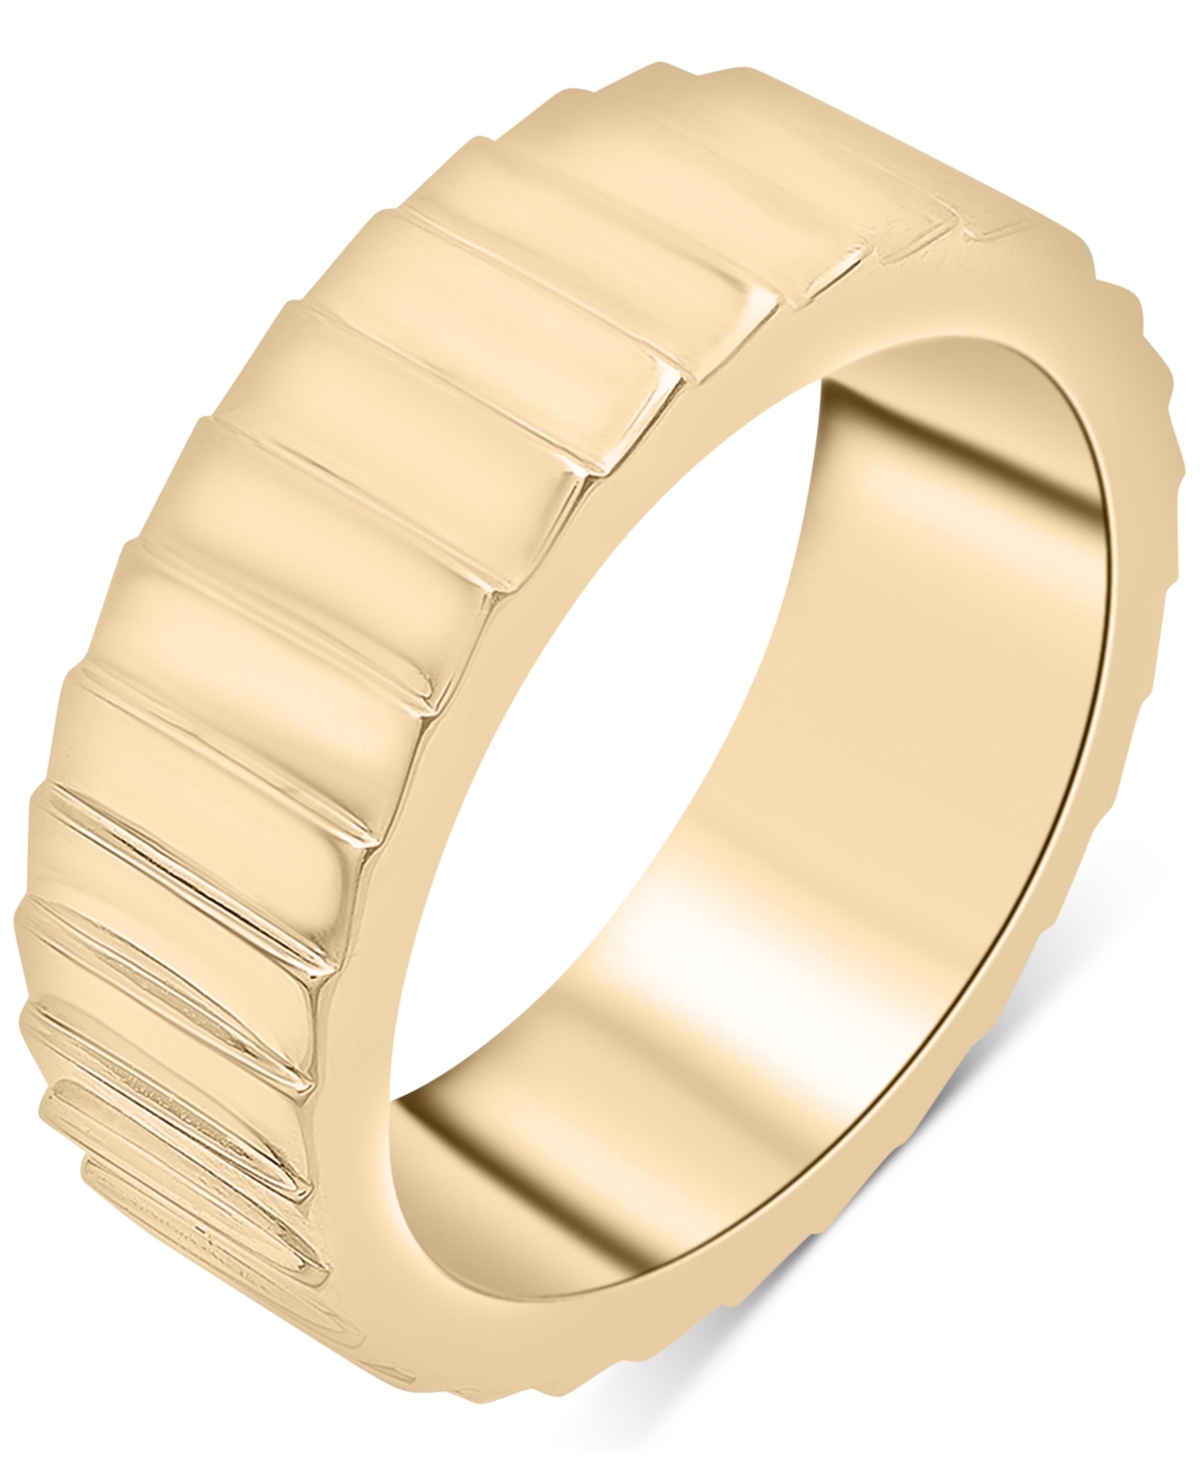 Textured Infinity Band in Gold Vermeil, Created for Macy's - Gold Vermeil